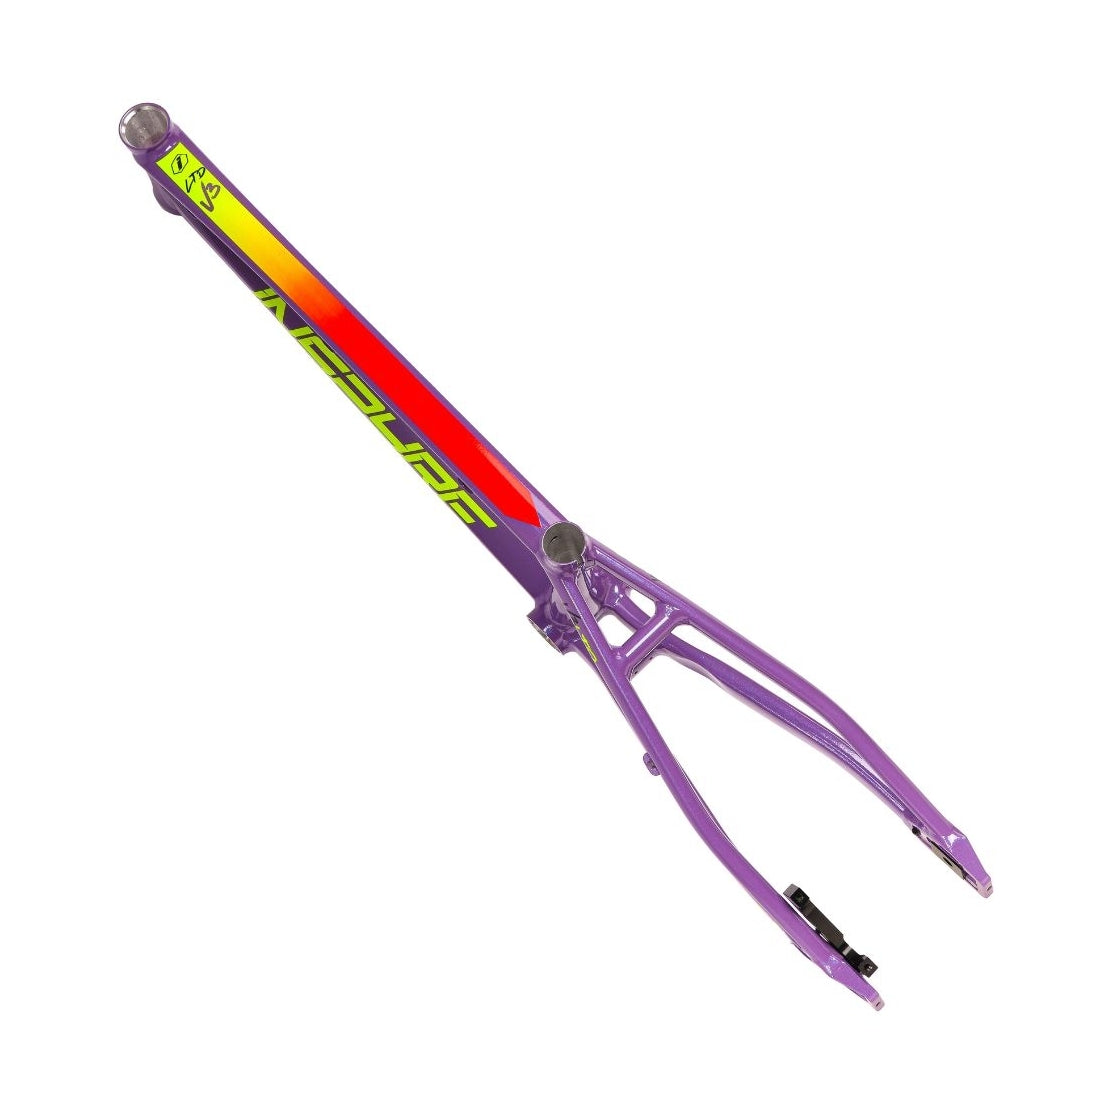 Inspyre Concorde V3 Pro XXXXL pogo stick with purple frame and multicolored detailing on an isolated white background.